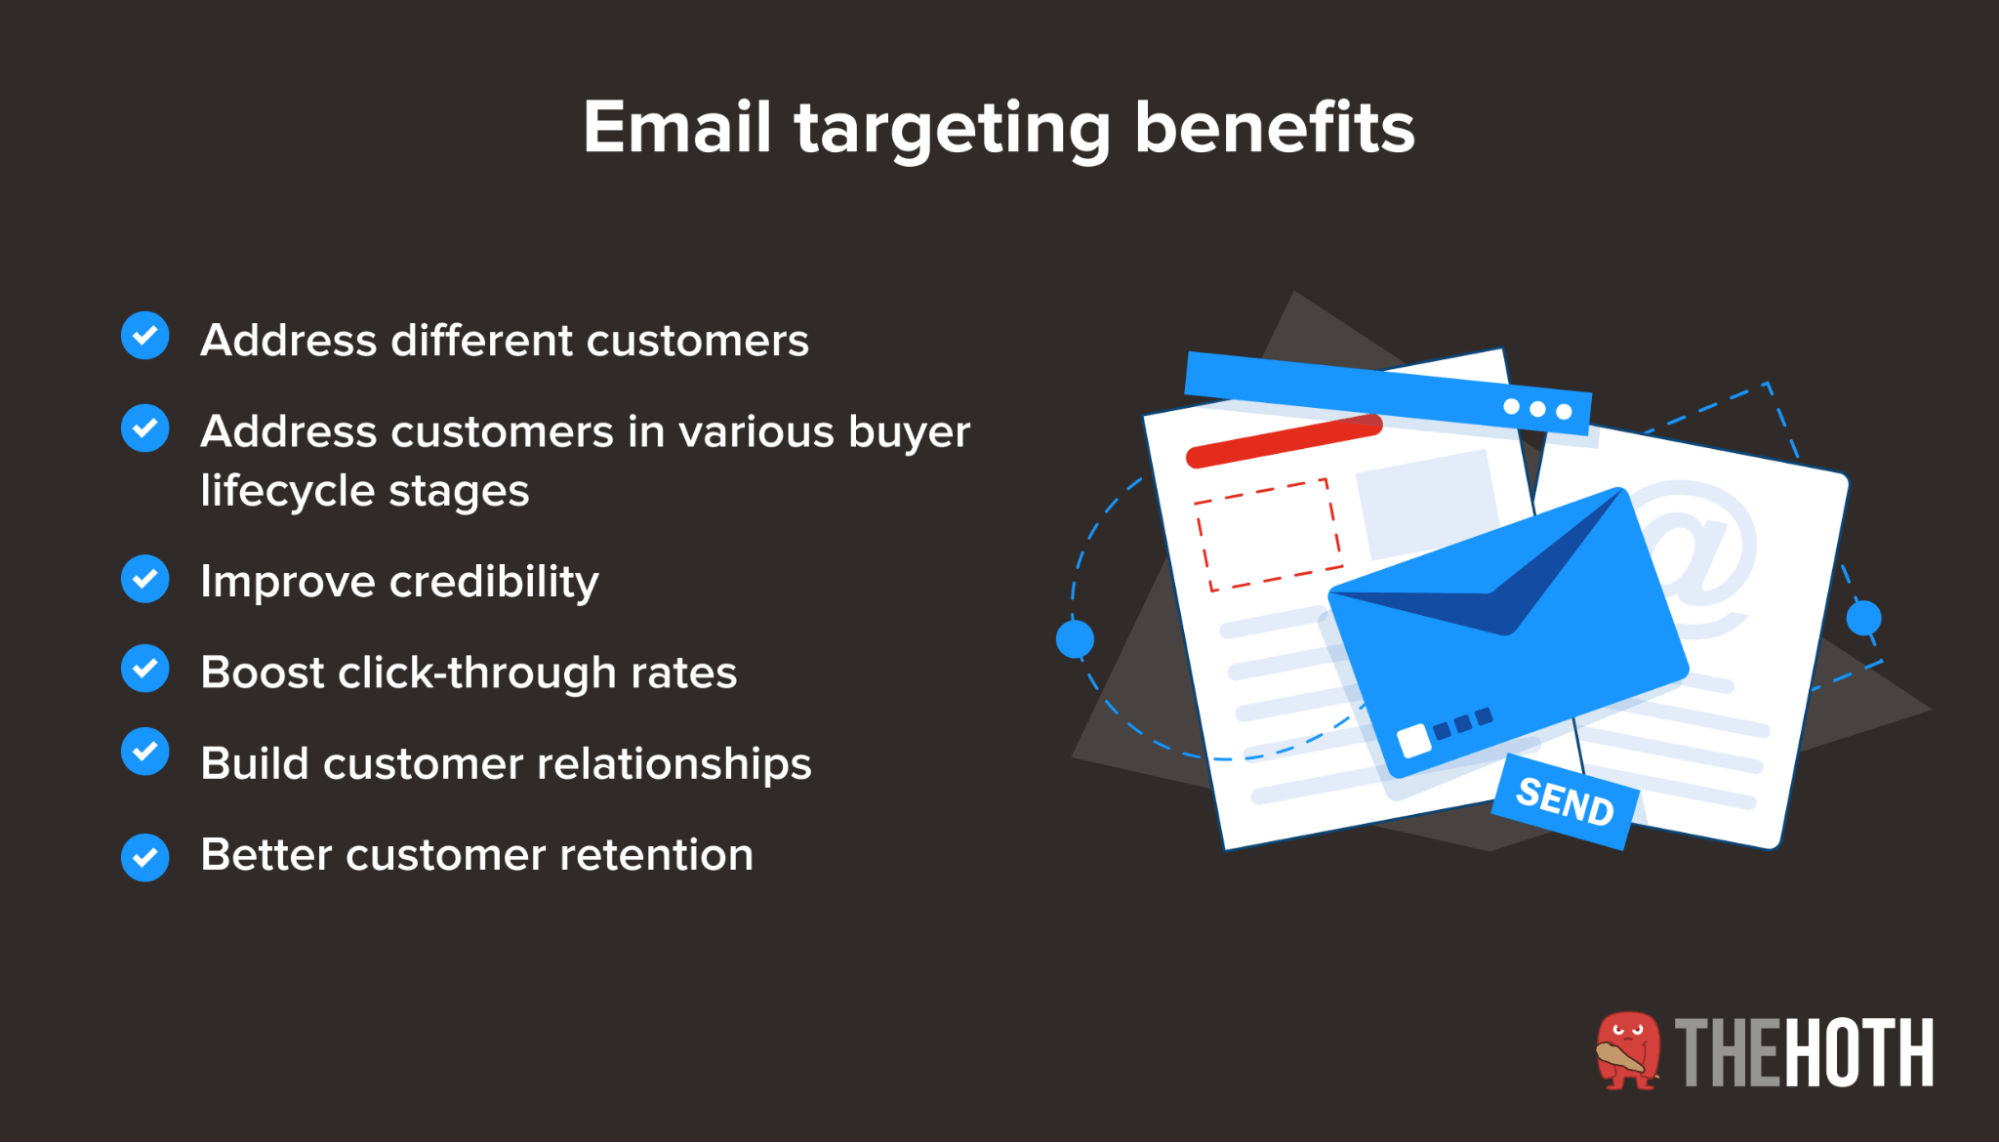 The benefits of a targeted email campaign